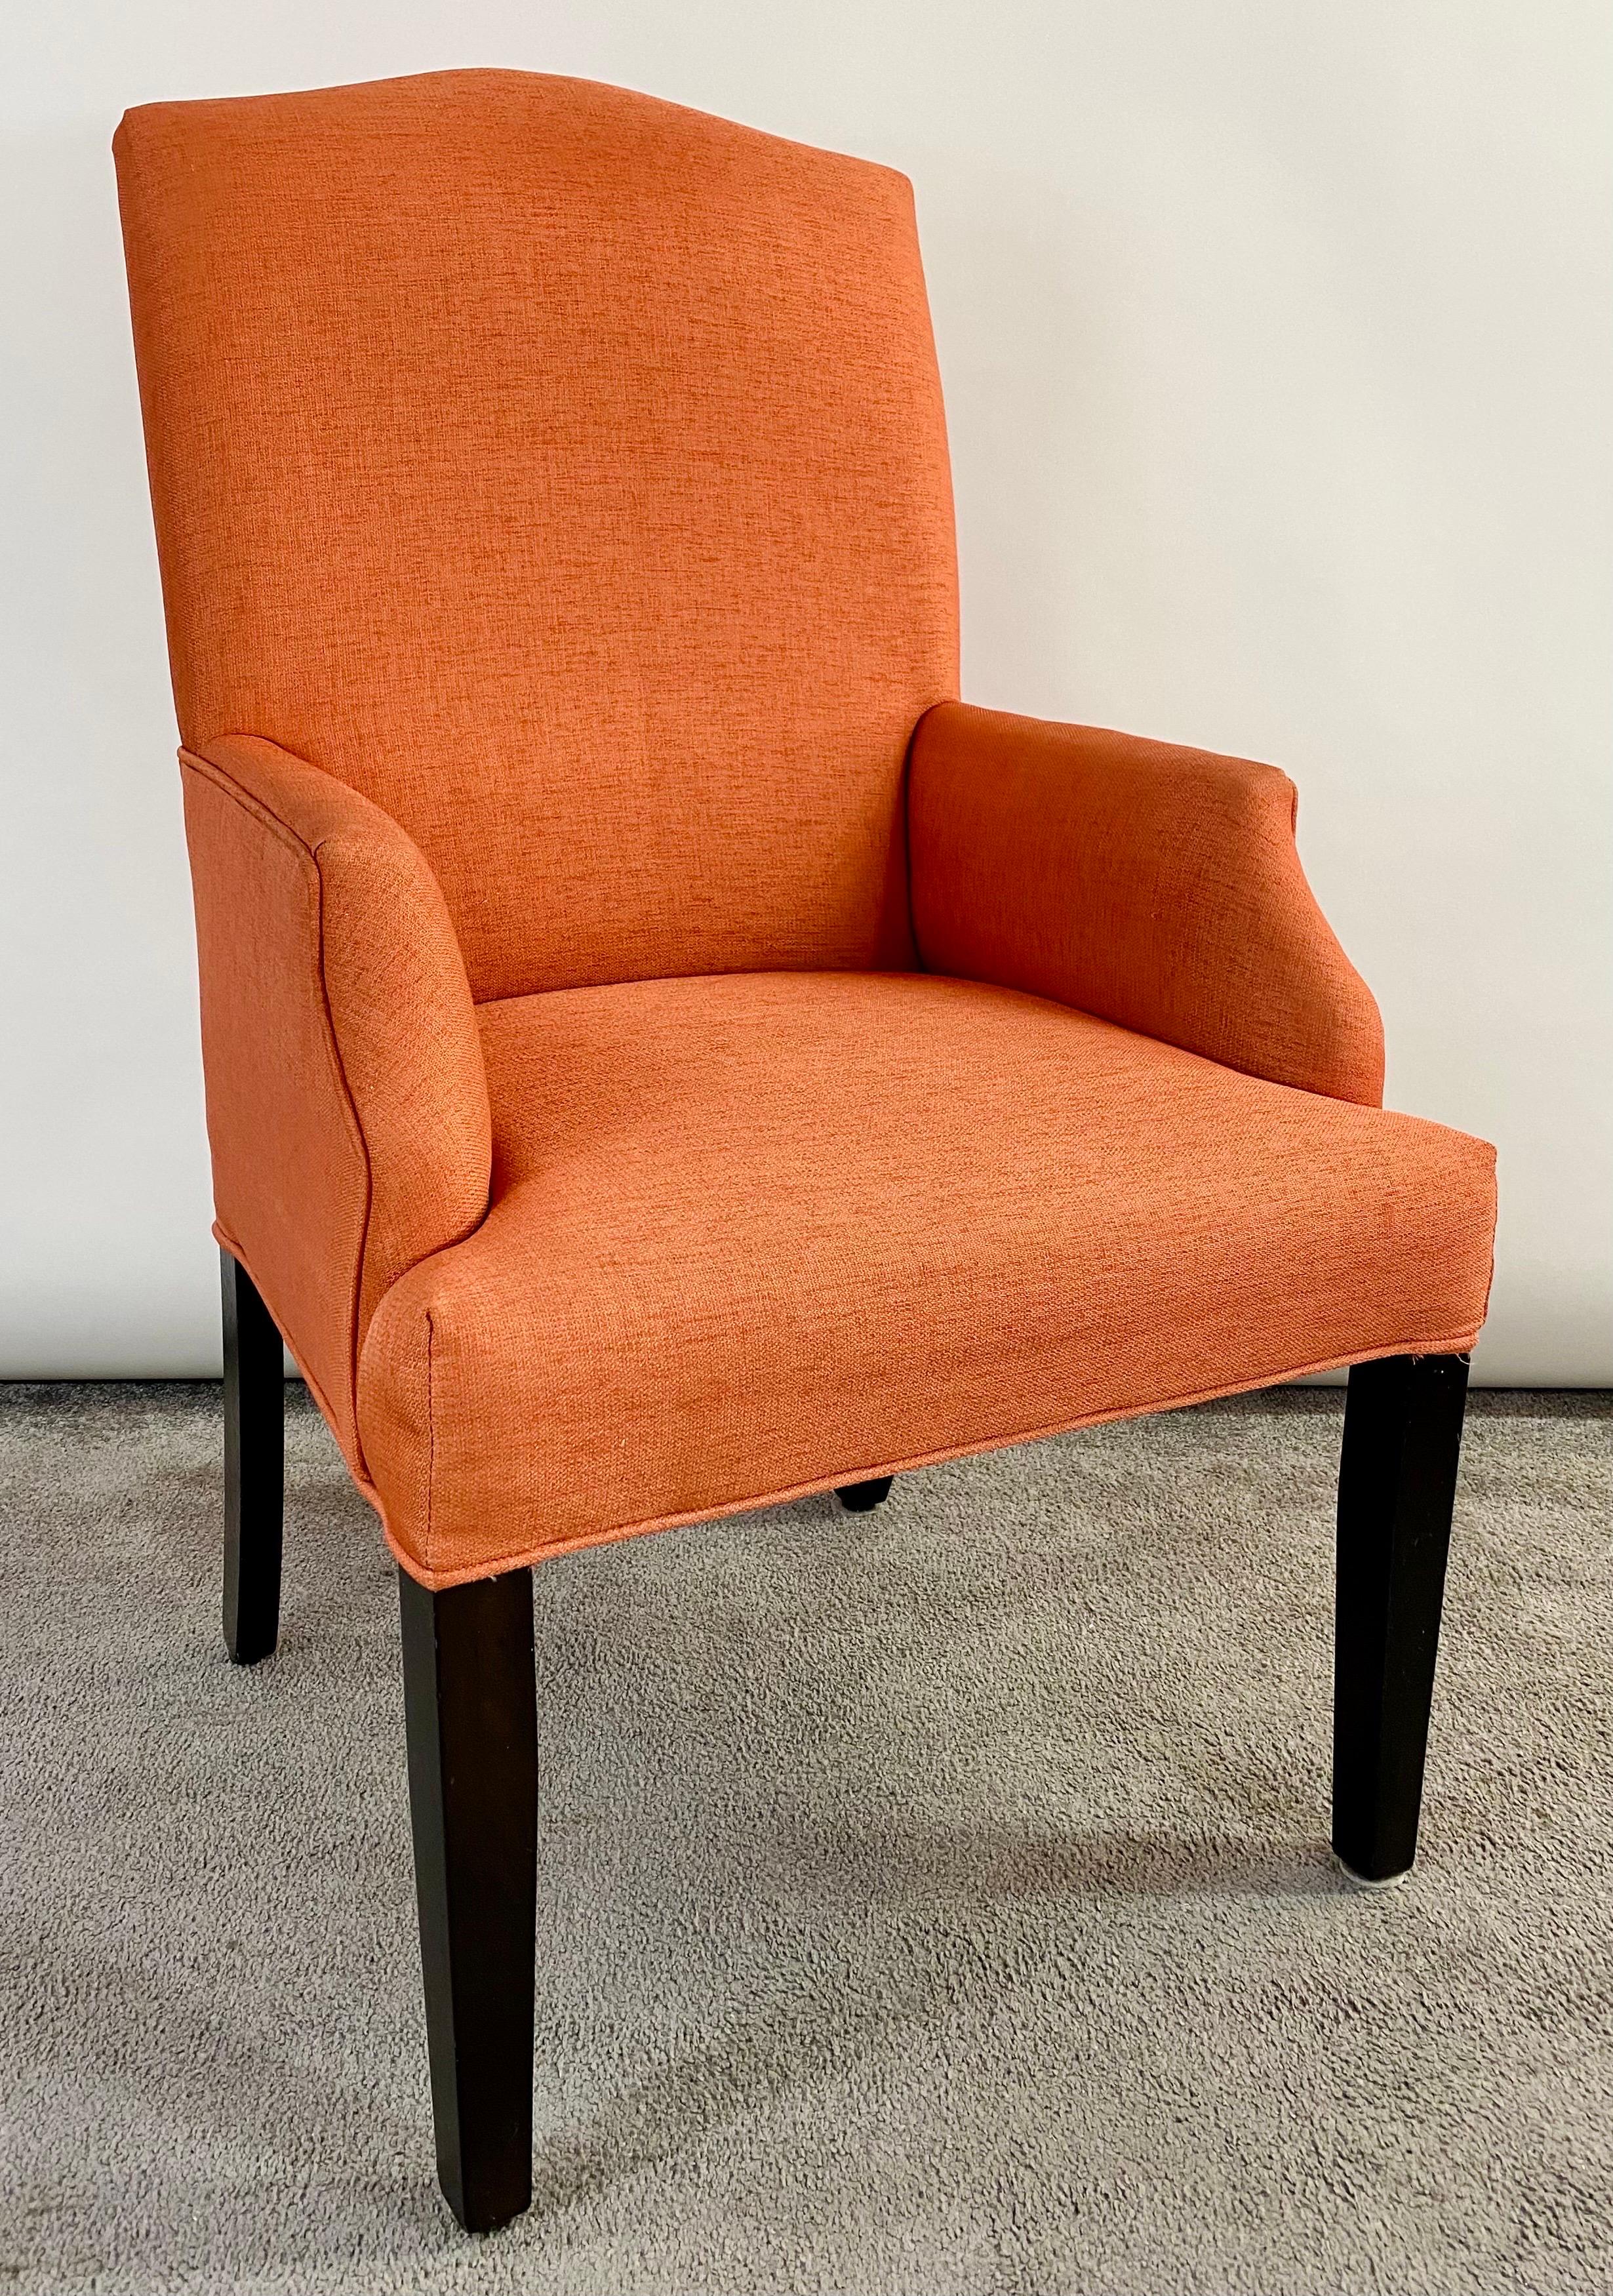 20th Century Edward Wormly Style Lounge or Side Chairs in Orange Hermes Upholstery, Pair 